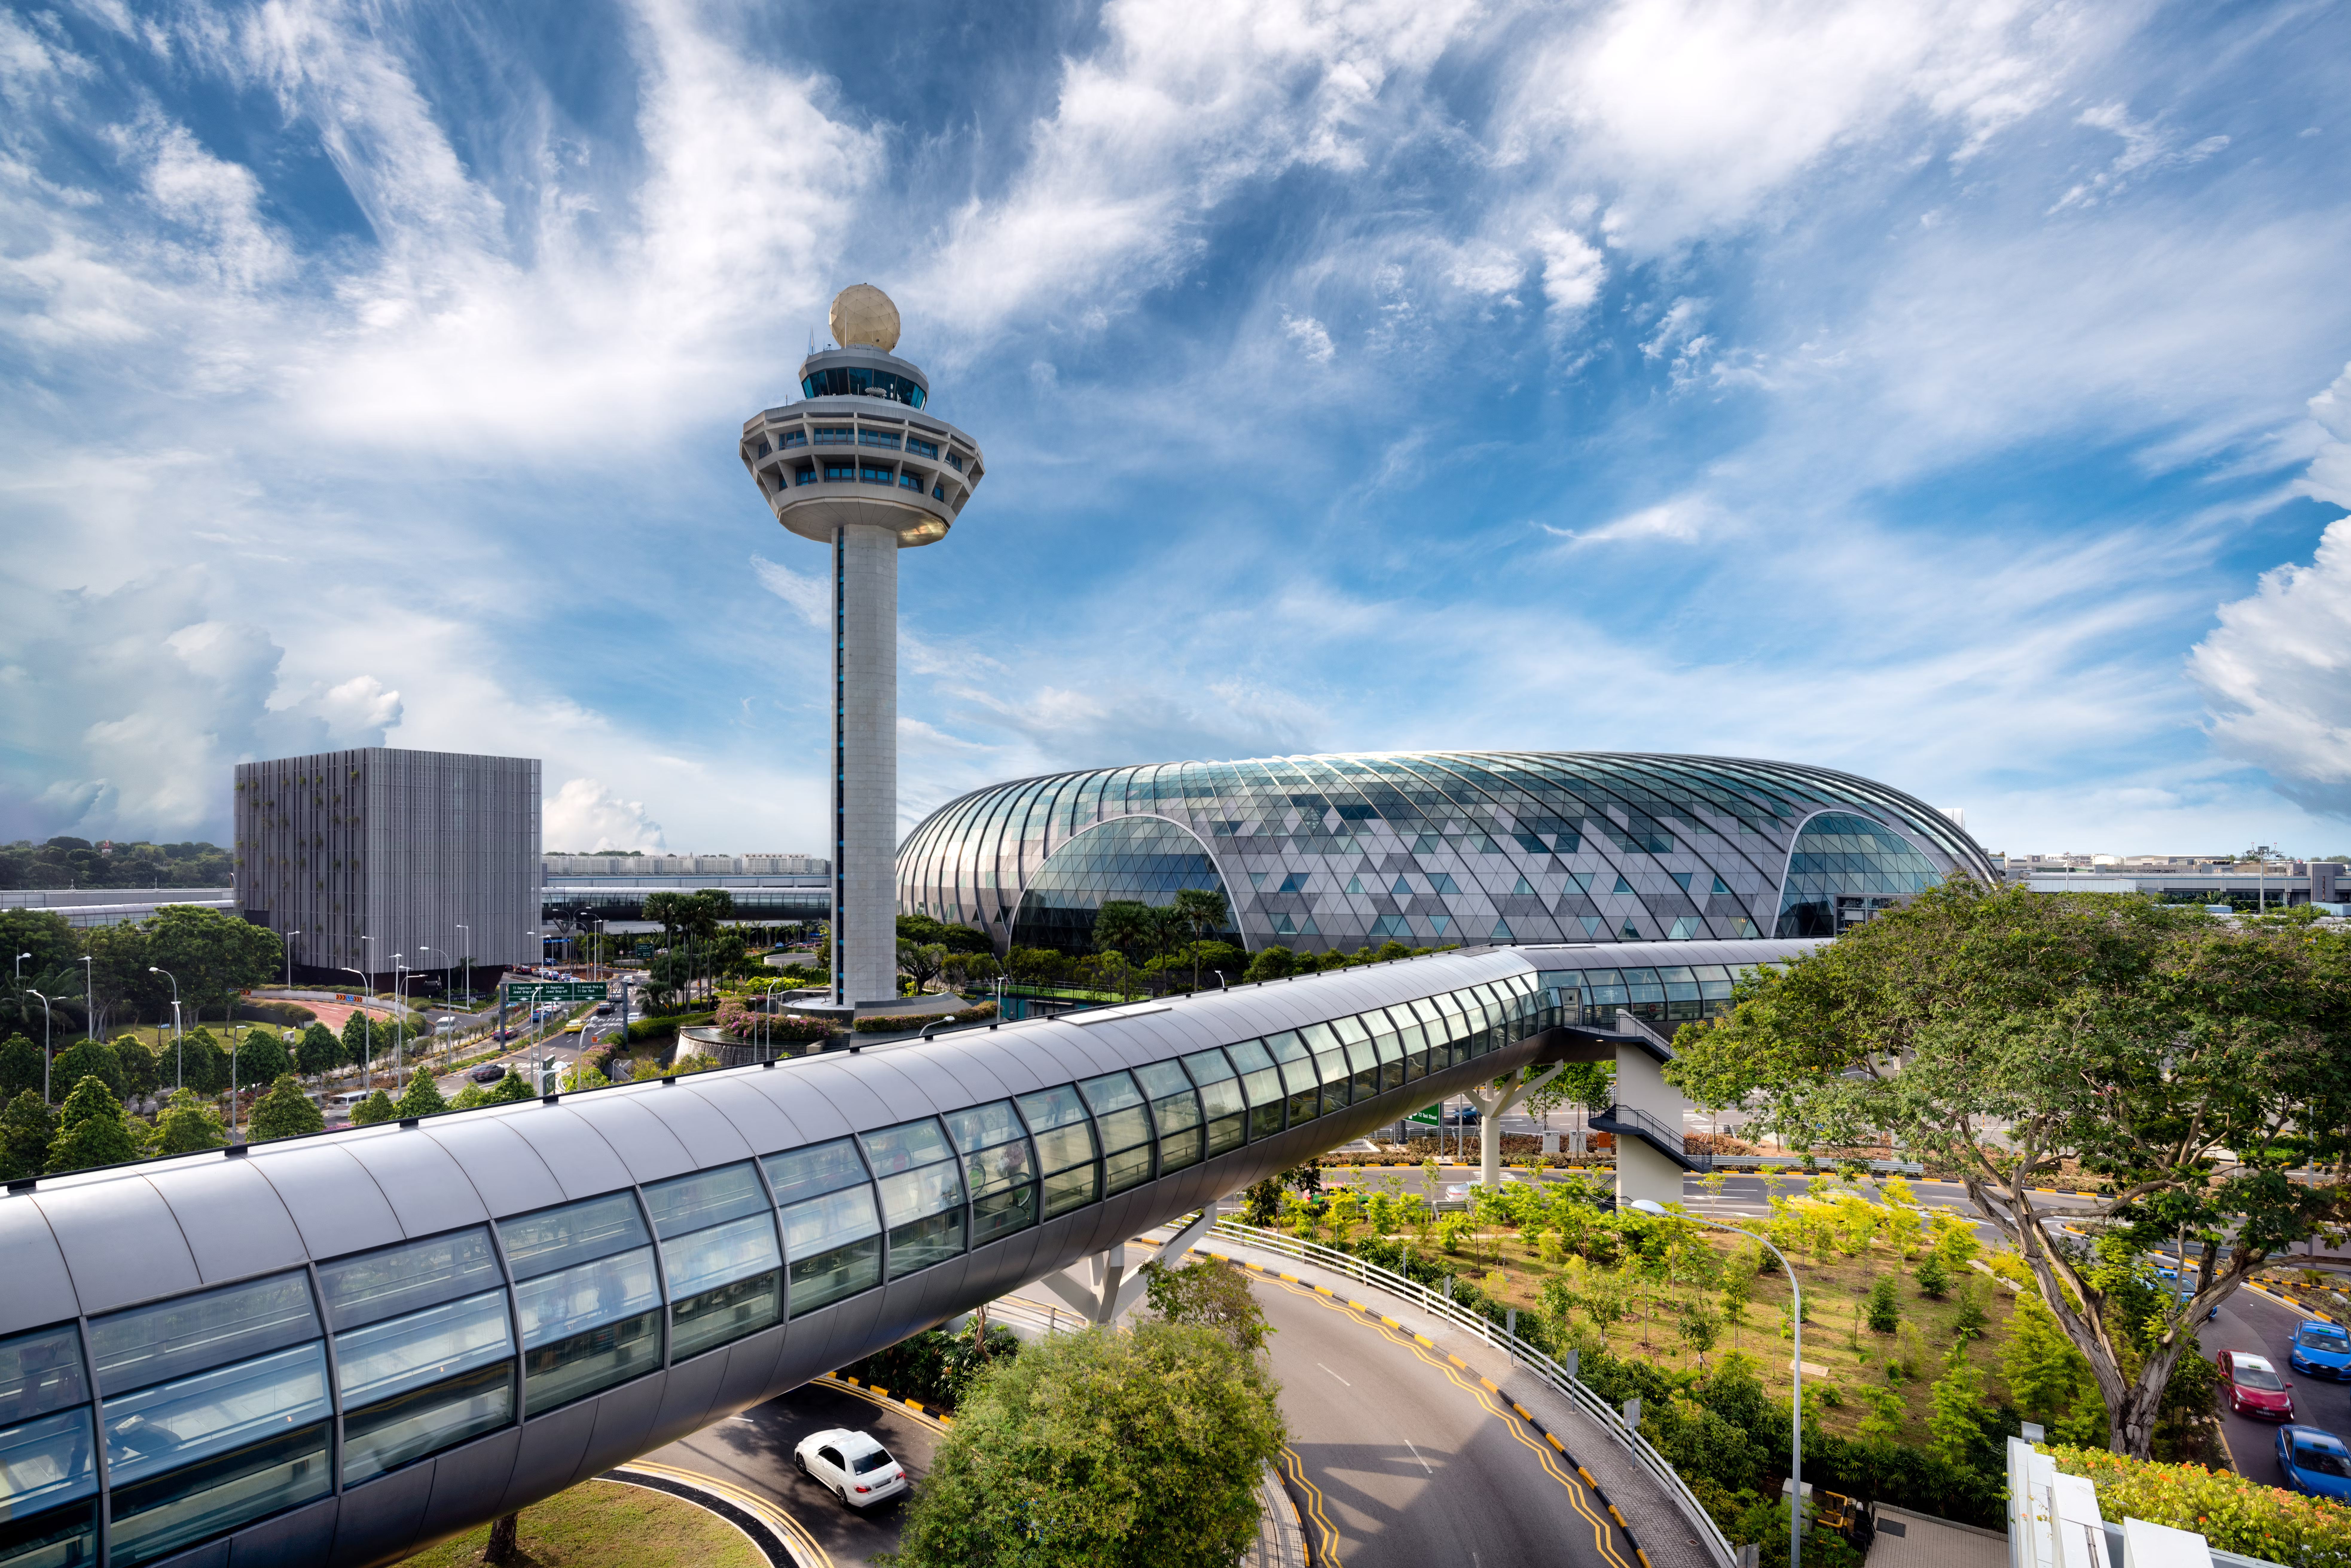 A panoramic photo from the outside of Singapore Changi Airport's Jewel.